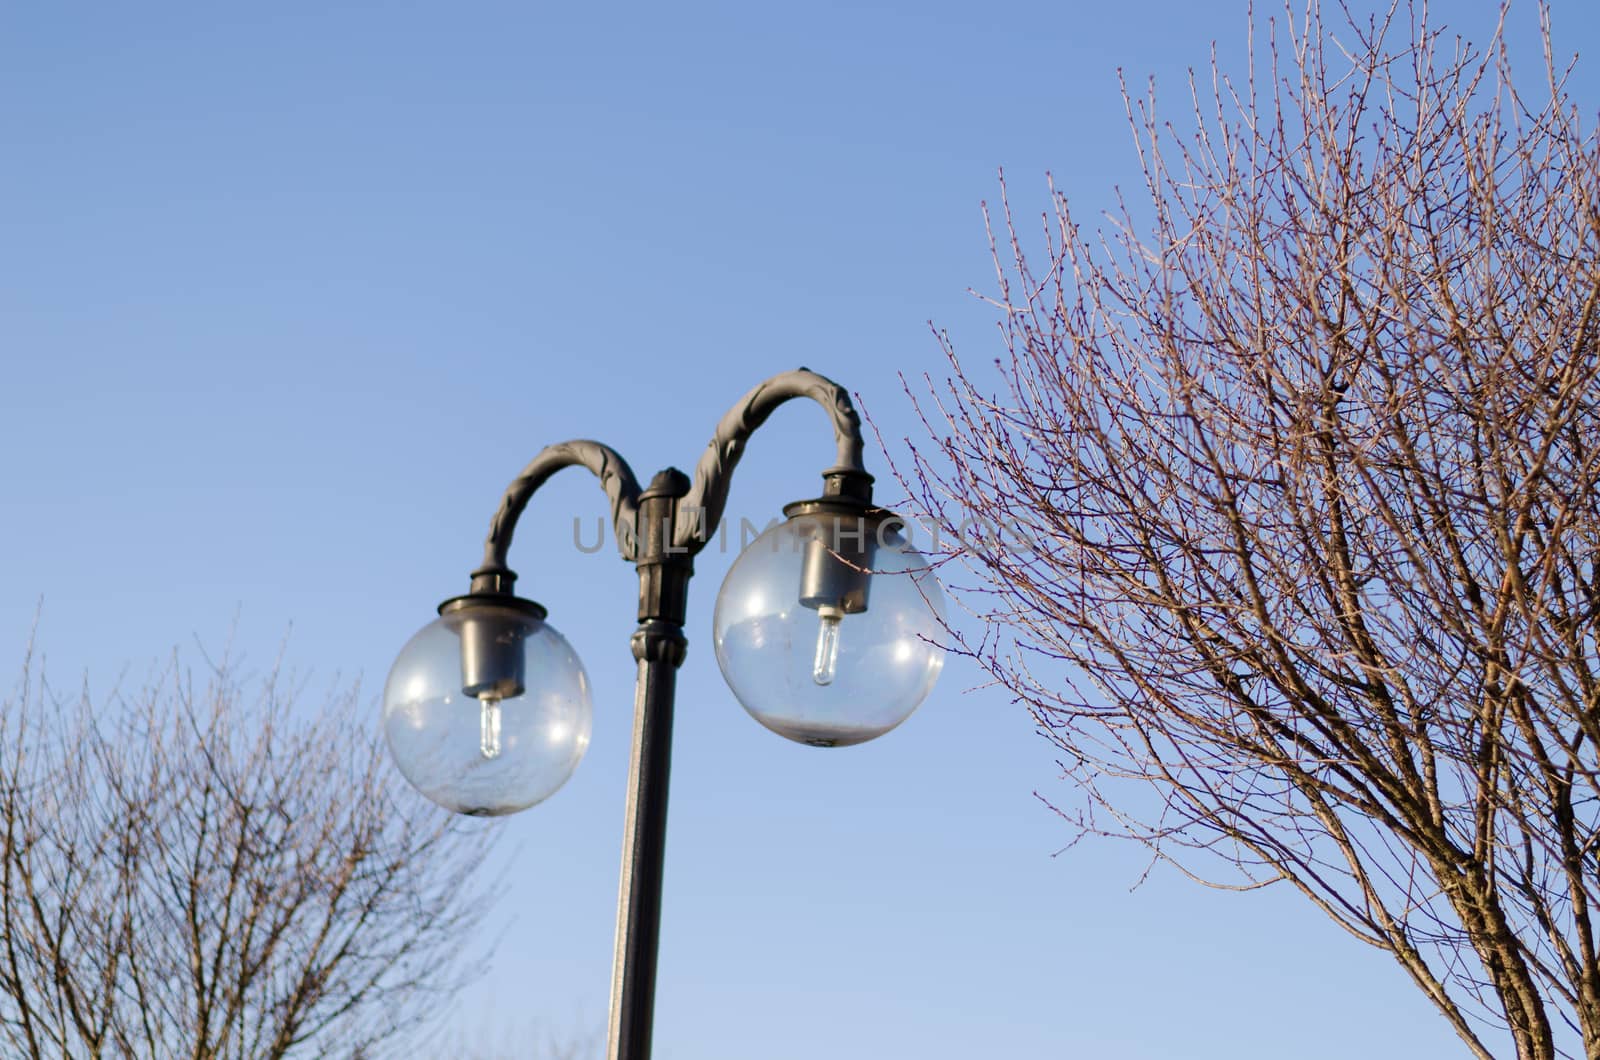 two hoods glass street lamp on blue sky background